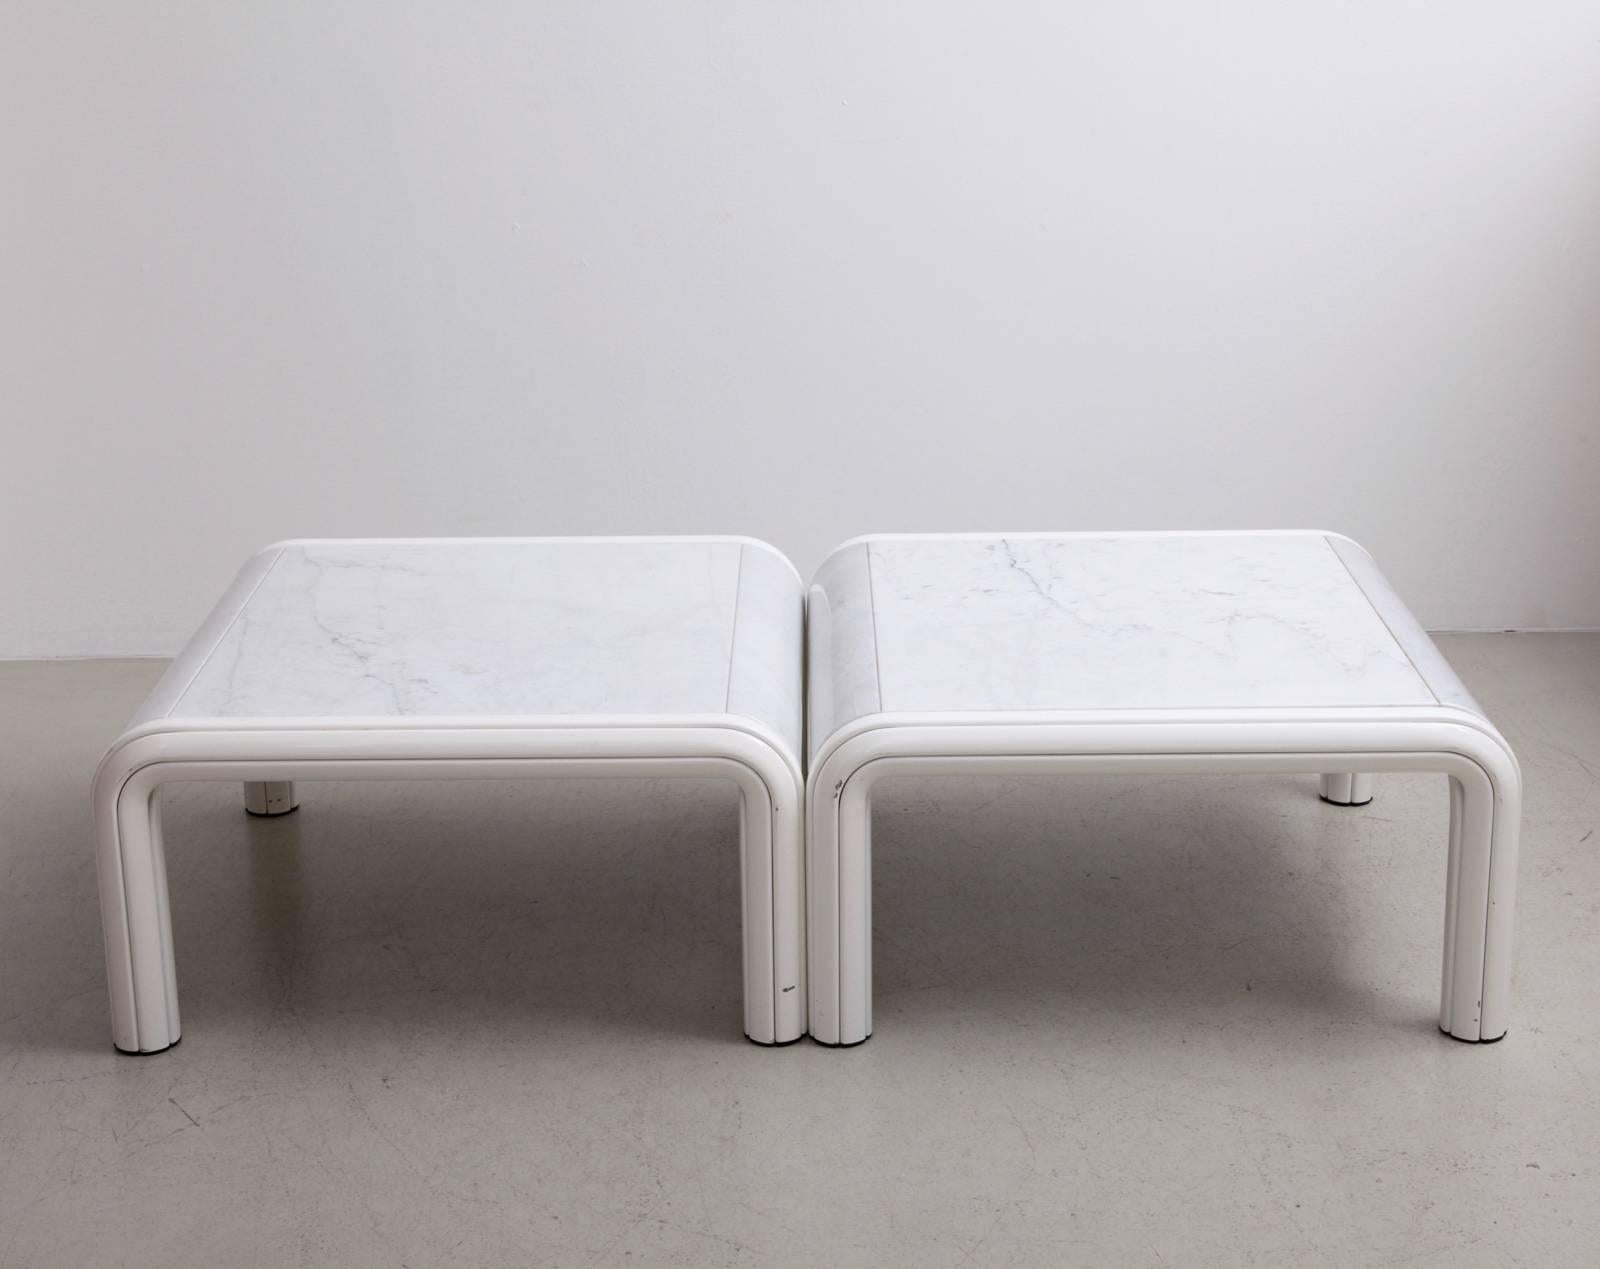 Italian Rare Pair of Marble Coffee or Sofa Tables by Gae Aulenti for Knoll, Italy, 1970s For Sale